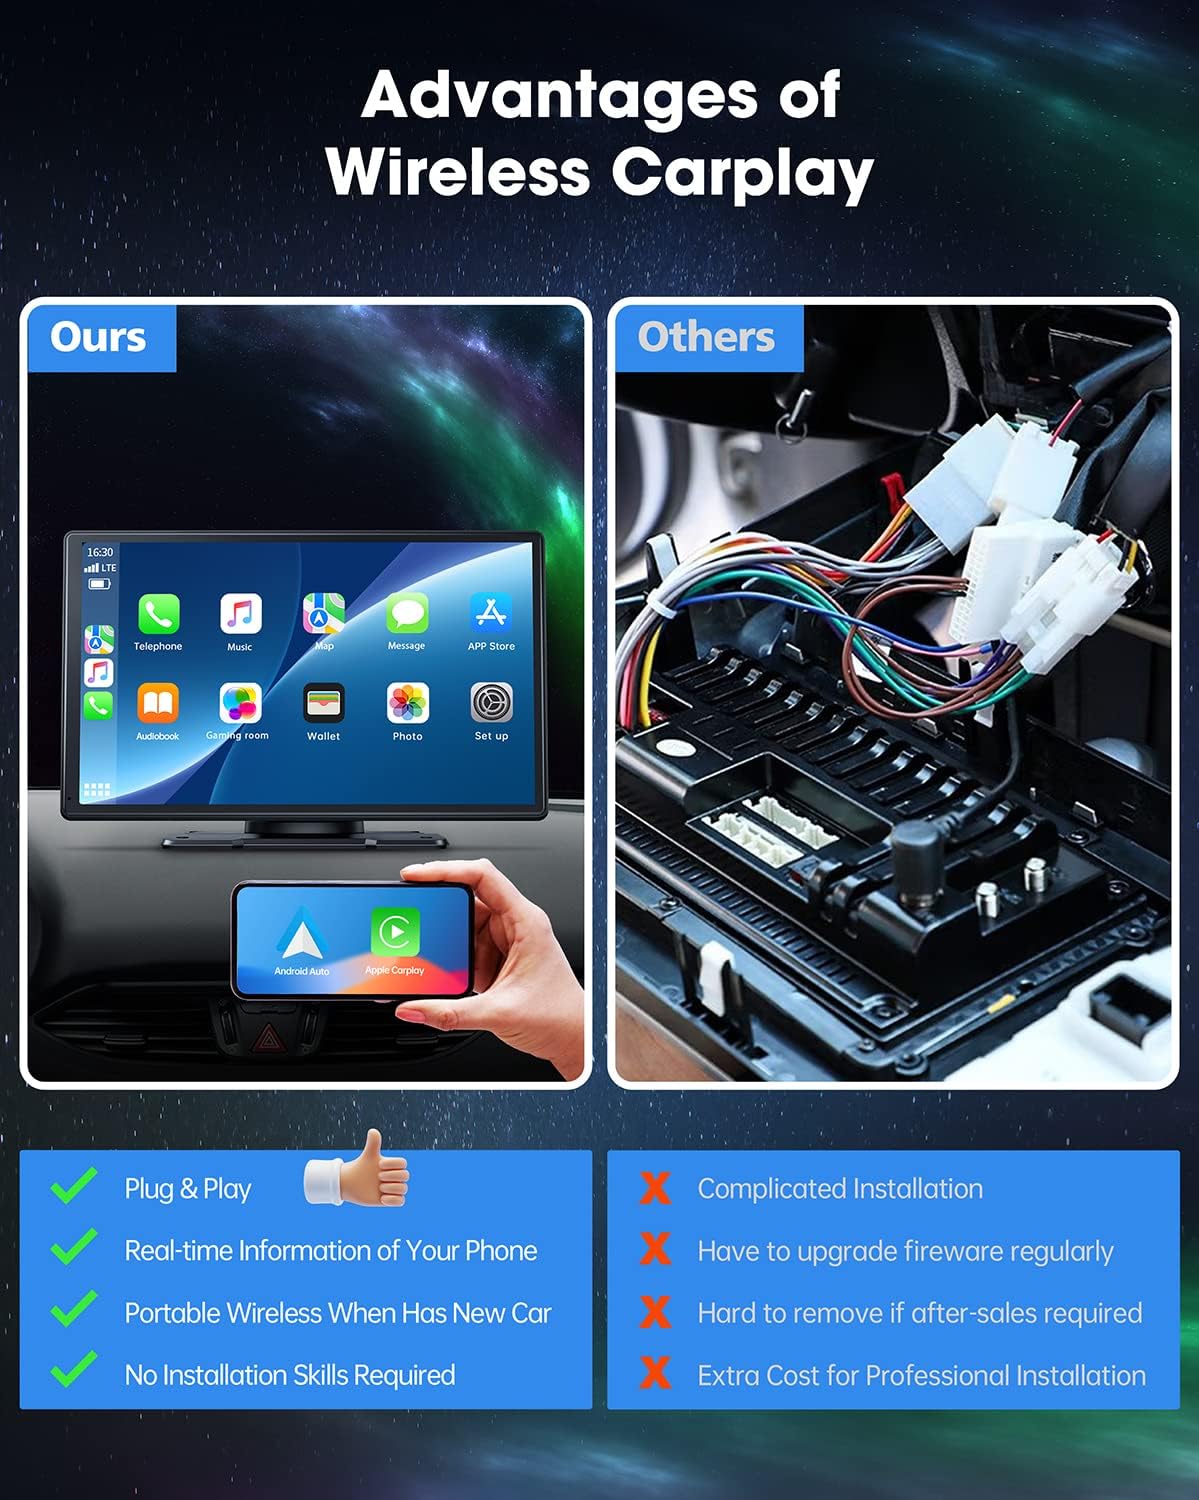 9 Inch Wireless Car Stereo with Apple Carplay and 1080P Reverse Camera, Car Audio Receivers with GPS Navigation, Mirror Link, Android Auto, Bluetooth